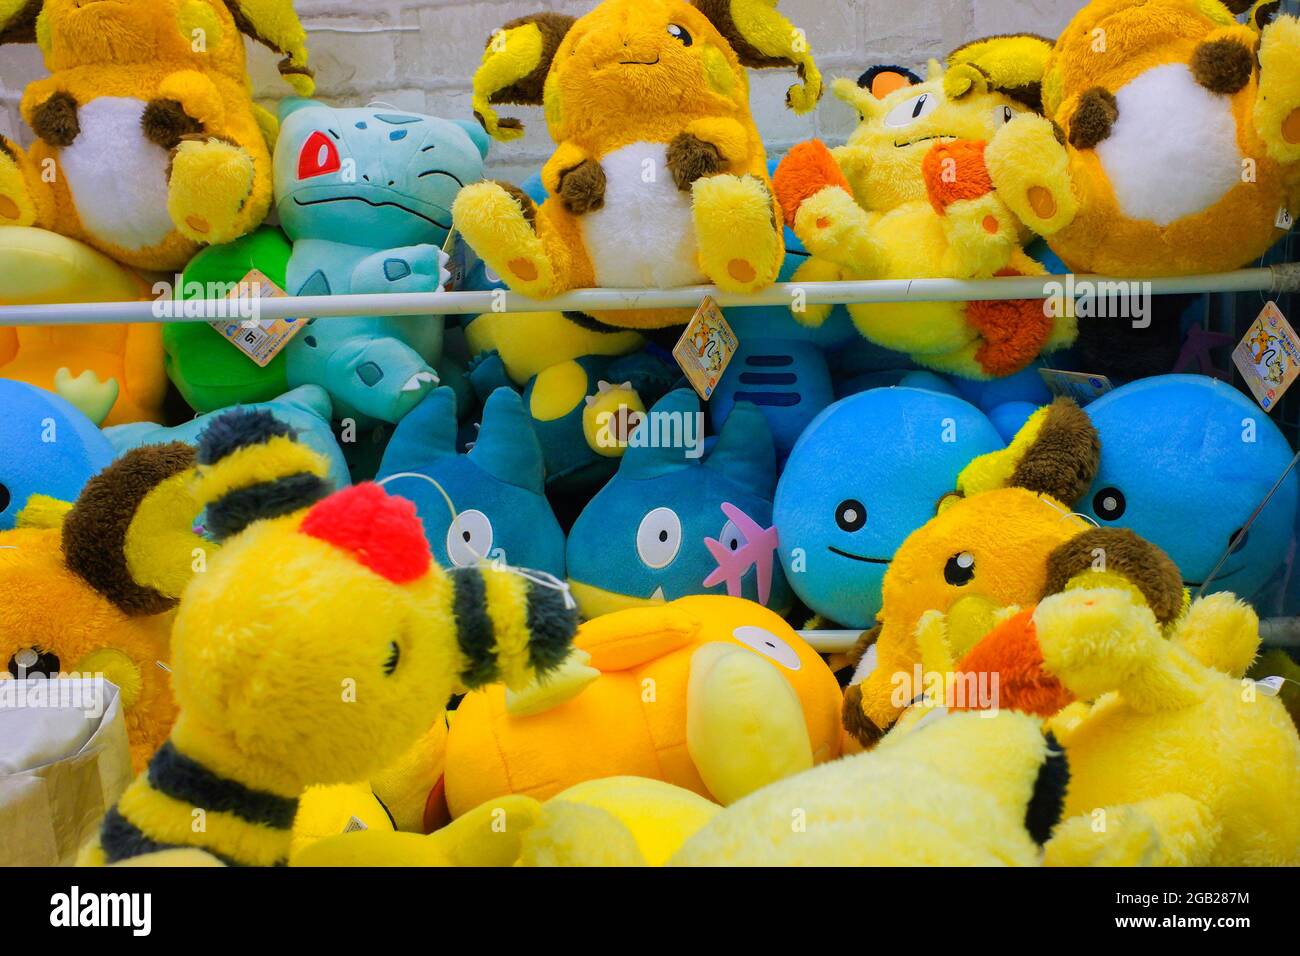 Pokemon store hi-res stock photography and images - Alamy